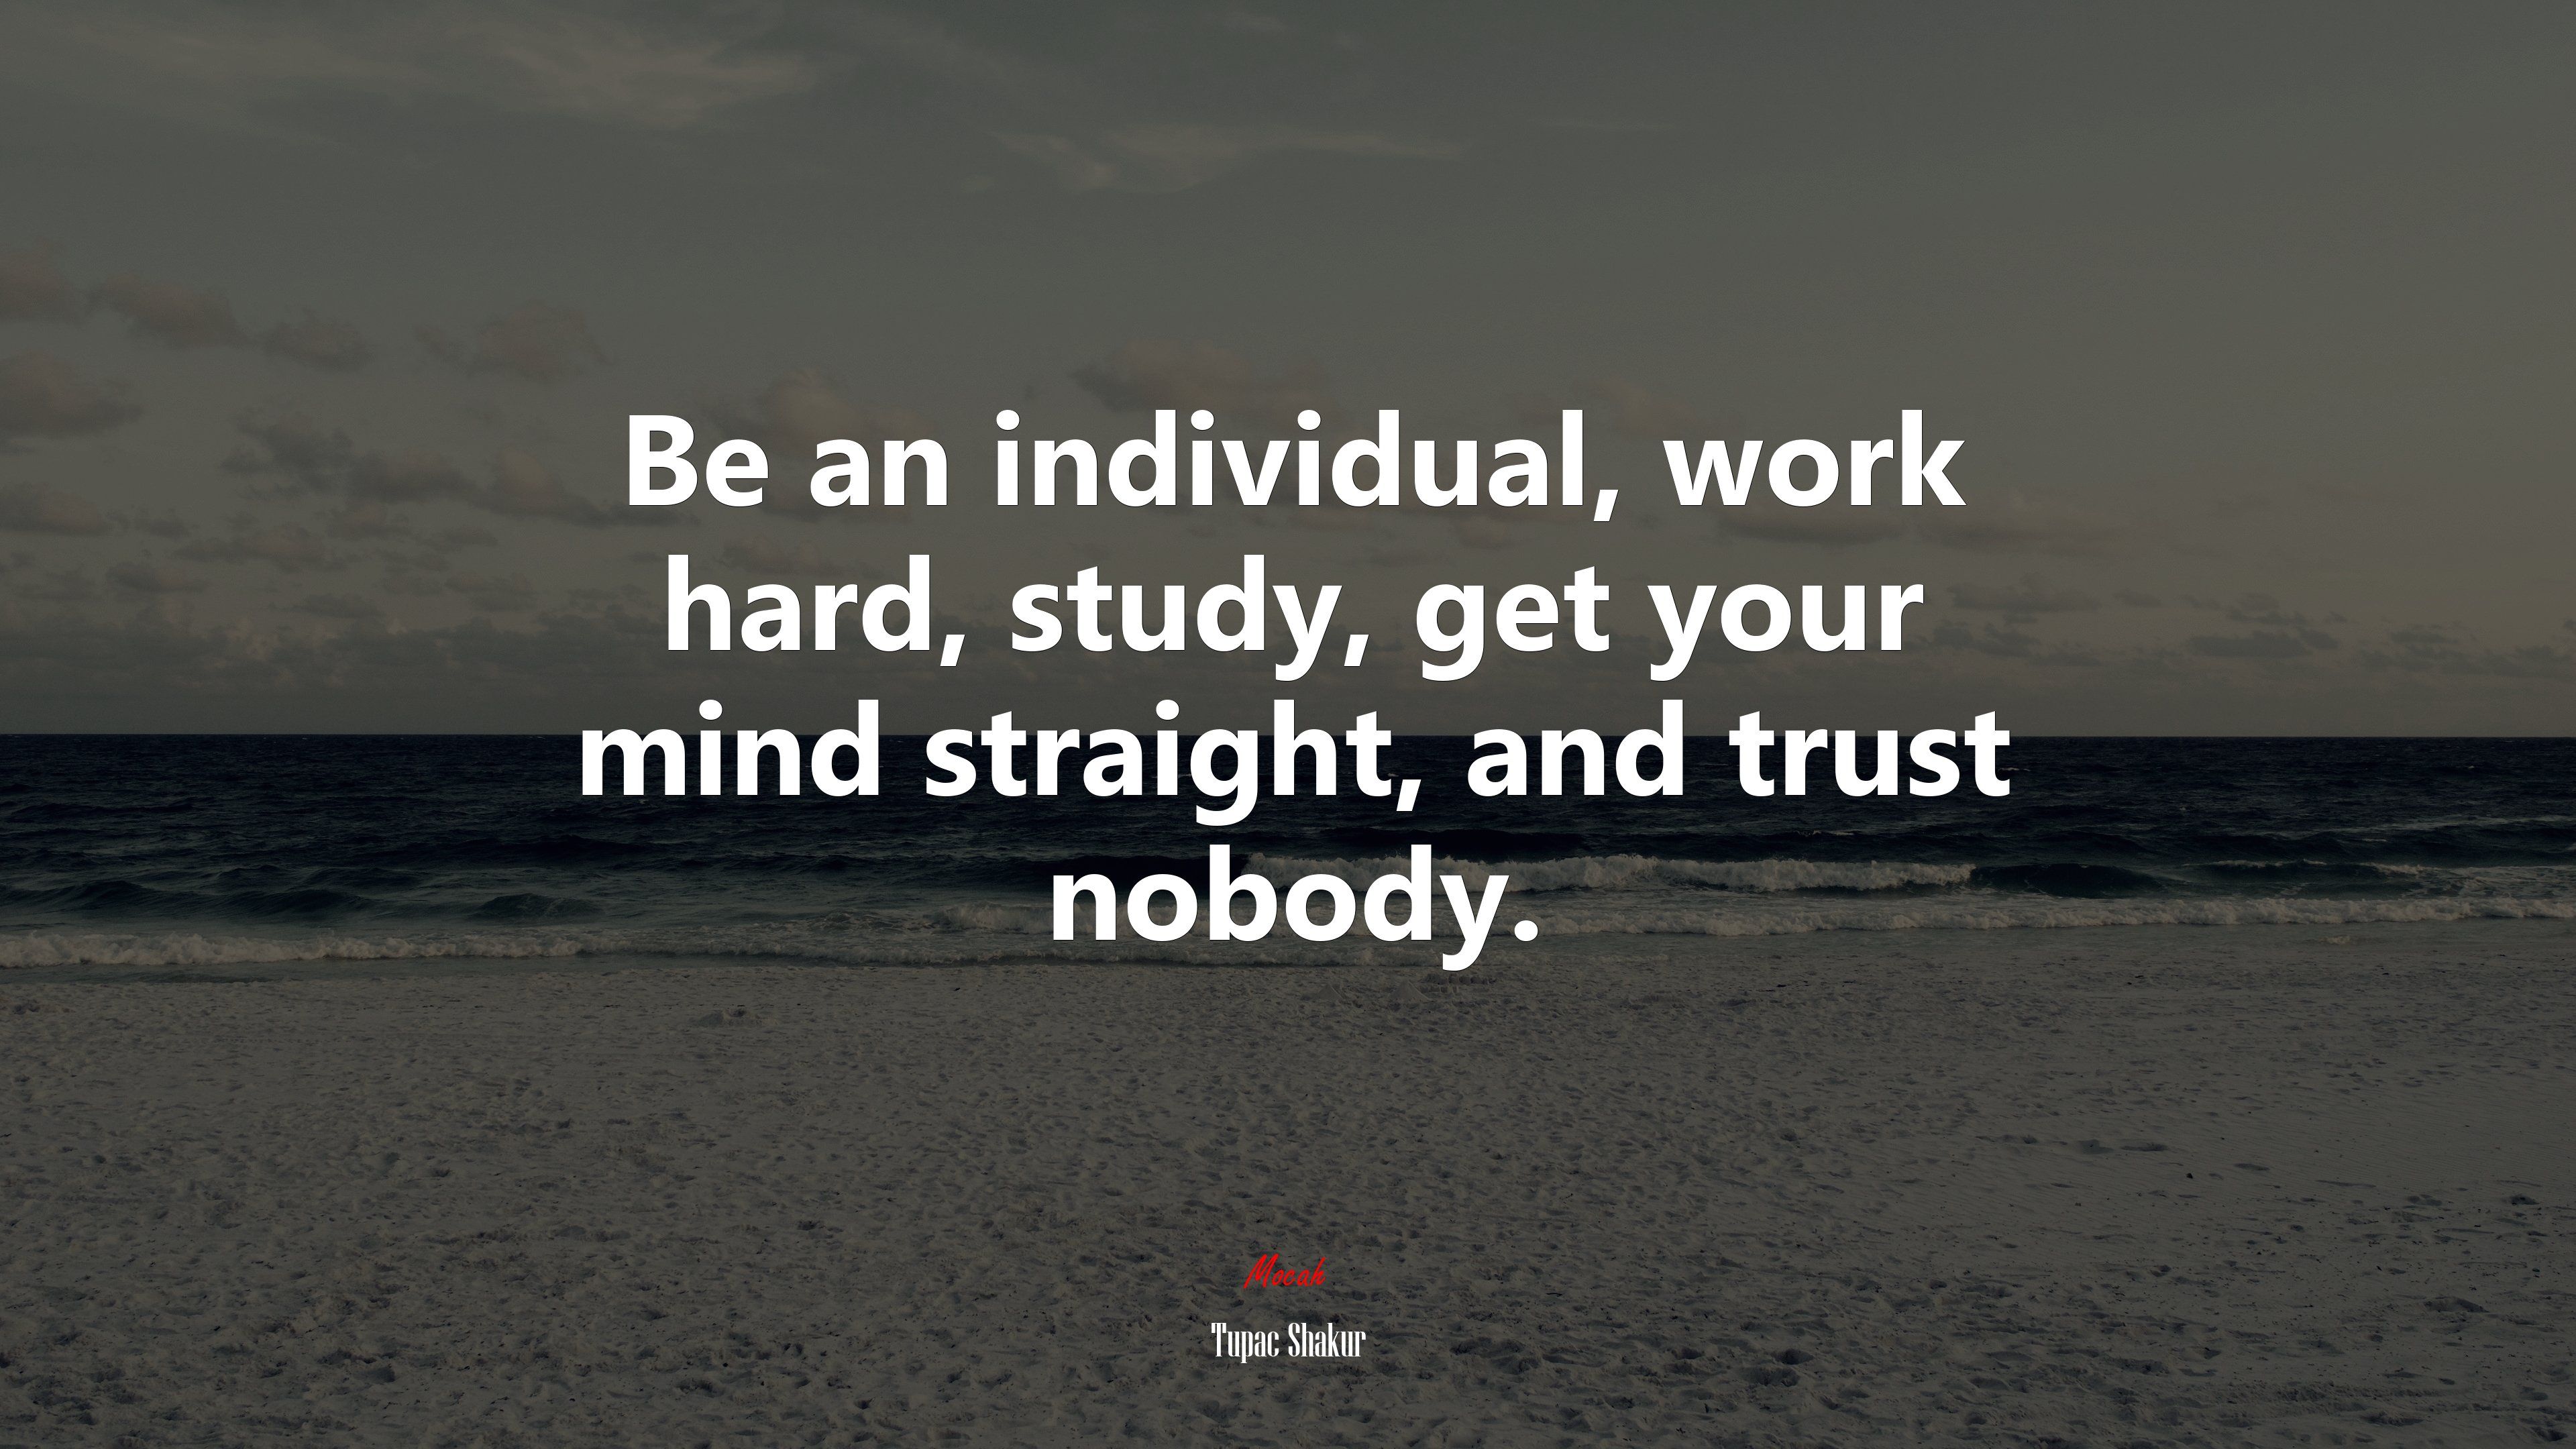 Be an individual, work hard, study, get your mind straight, and trust nobody. Tupac Shakur quote, 4k wallpaper. Mocah HD Wallpaper